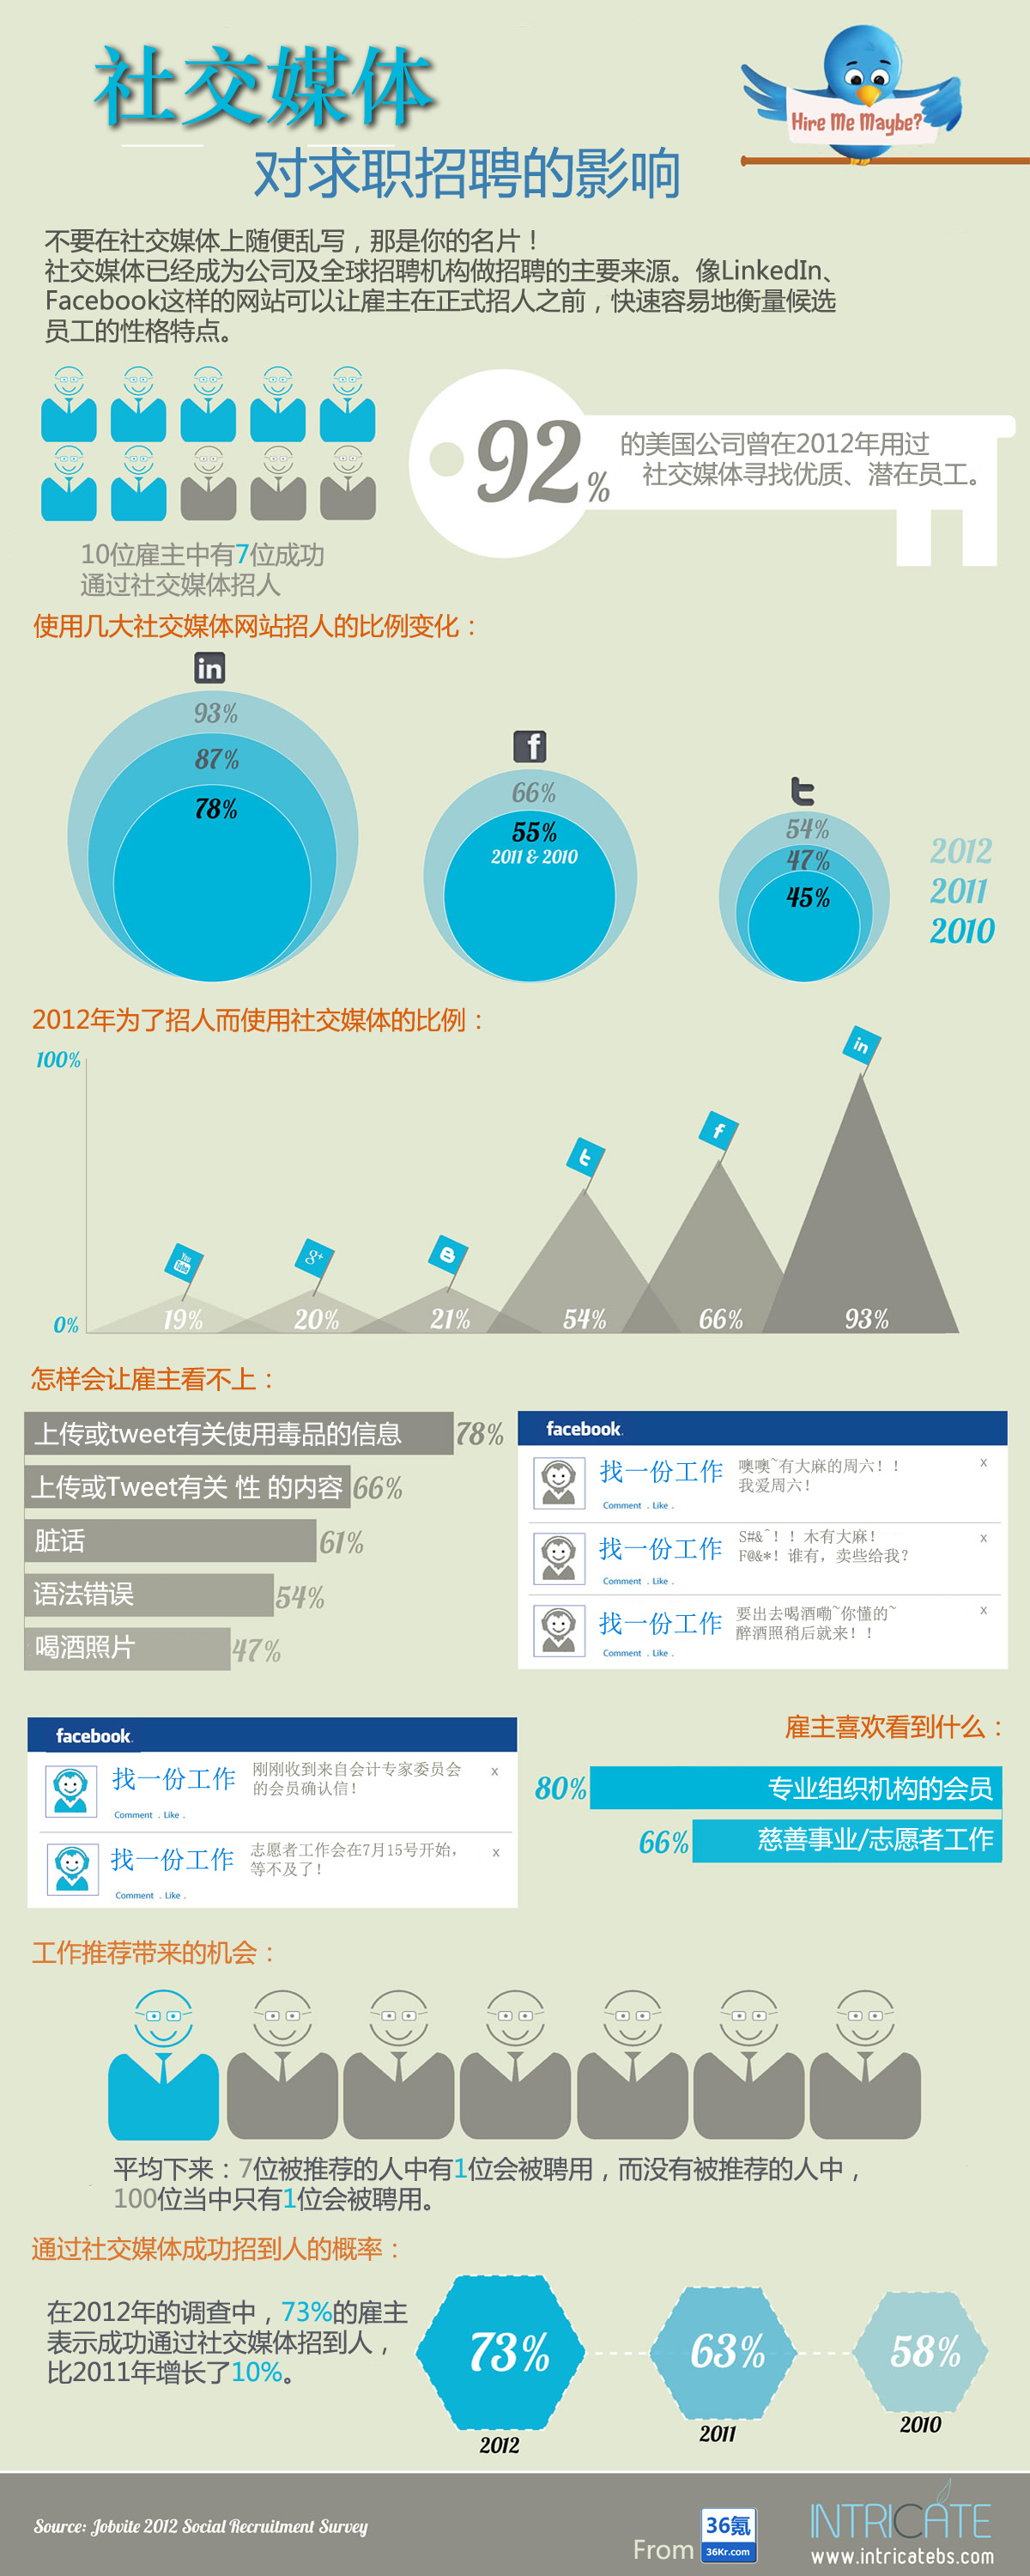 Social-Media-and-the-Effect-on-Recruitment-INFOGRAPHICccc